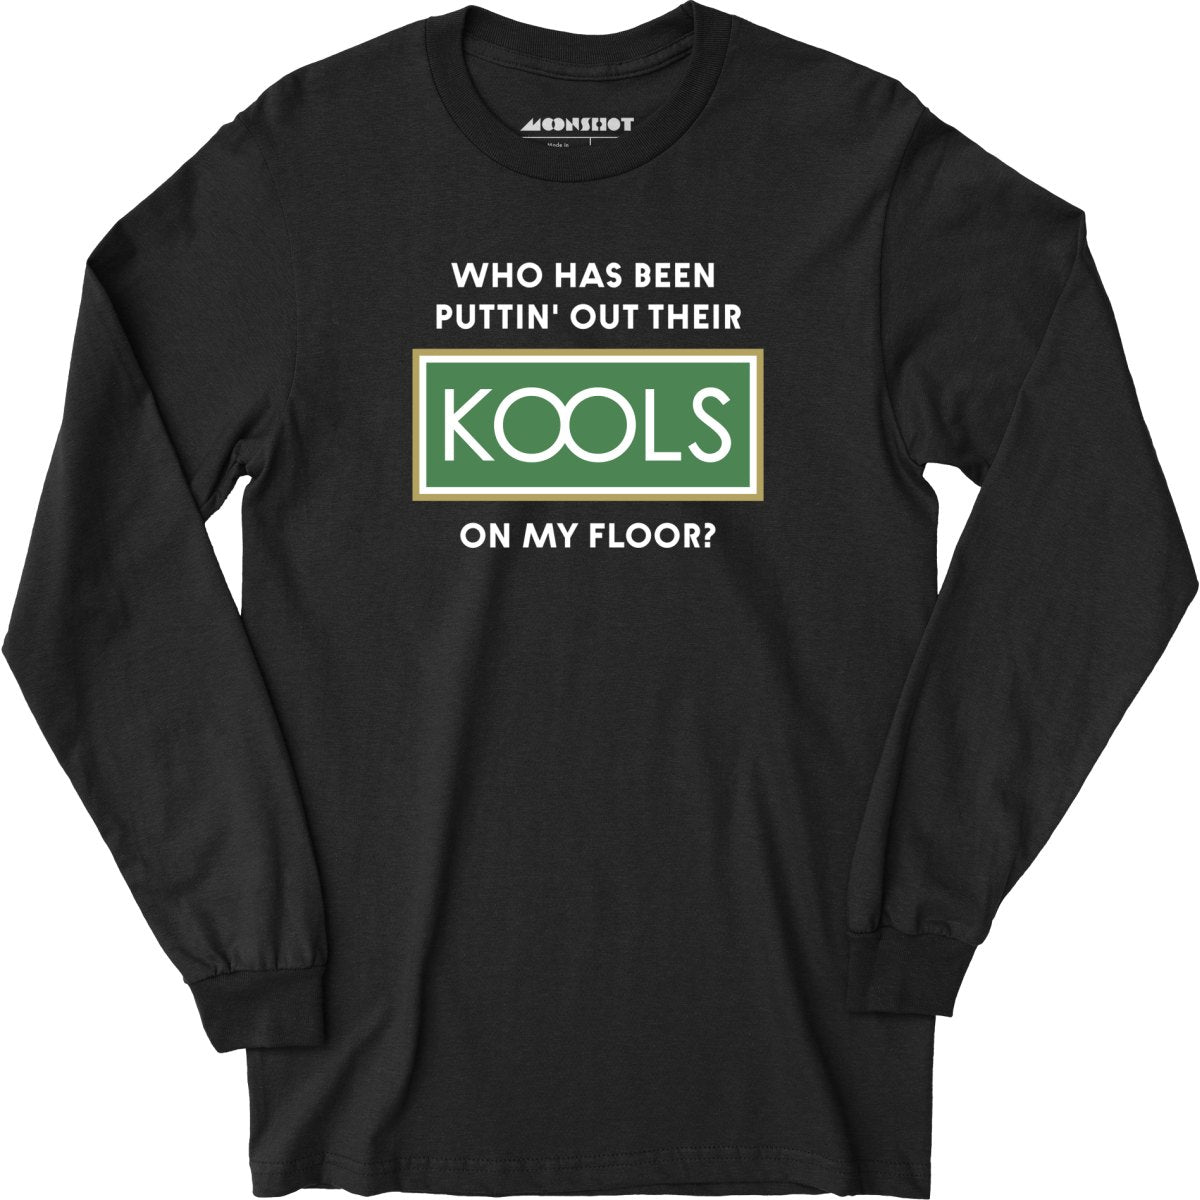 Who Has Been Puttin' Out Their Kools On My Floor? - Long Sleeve T-Shirt